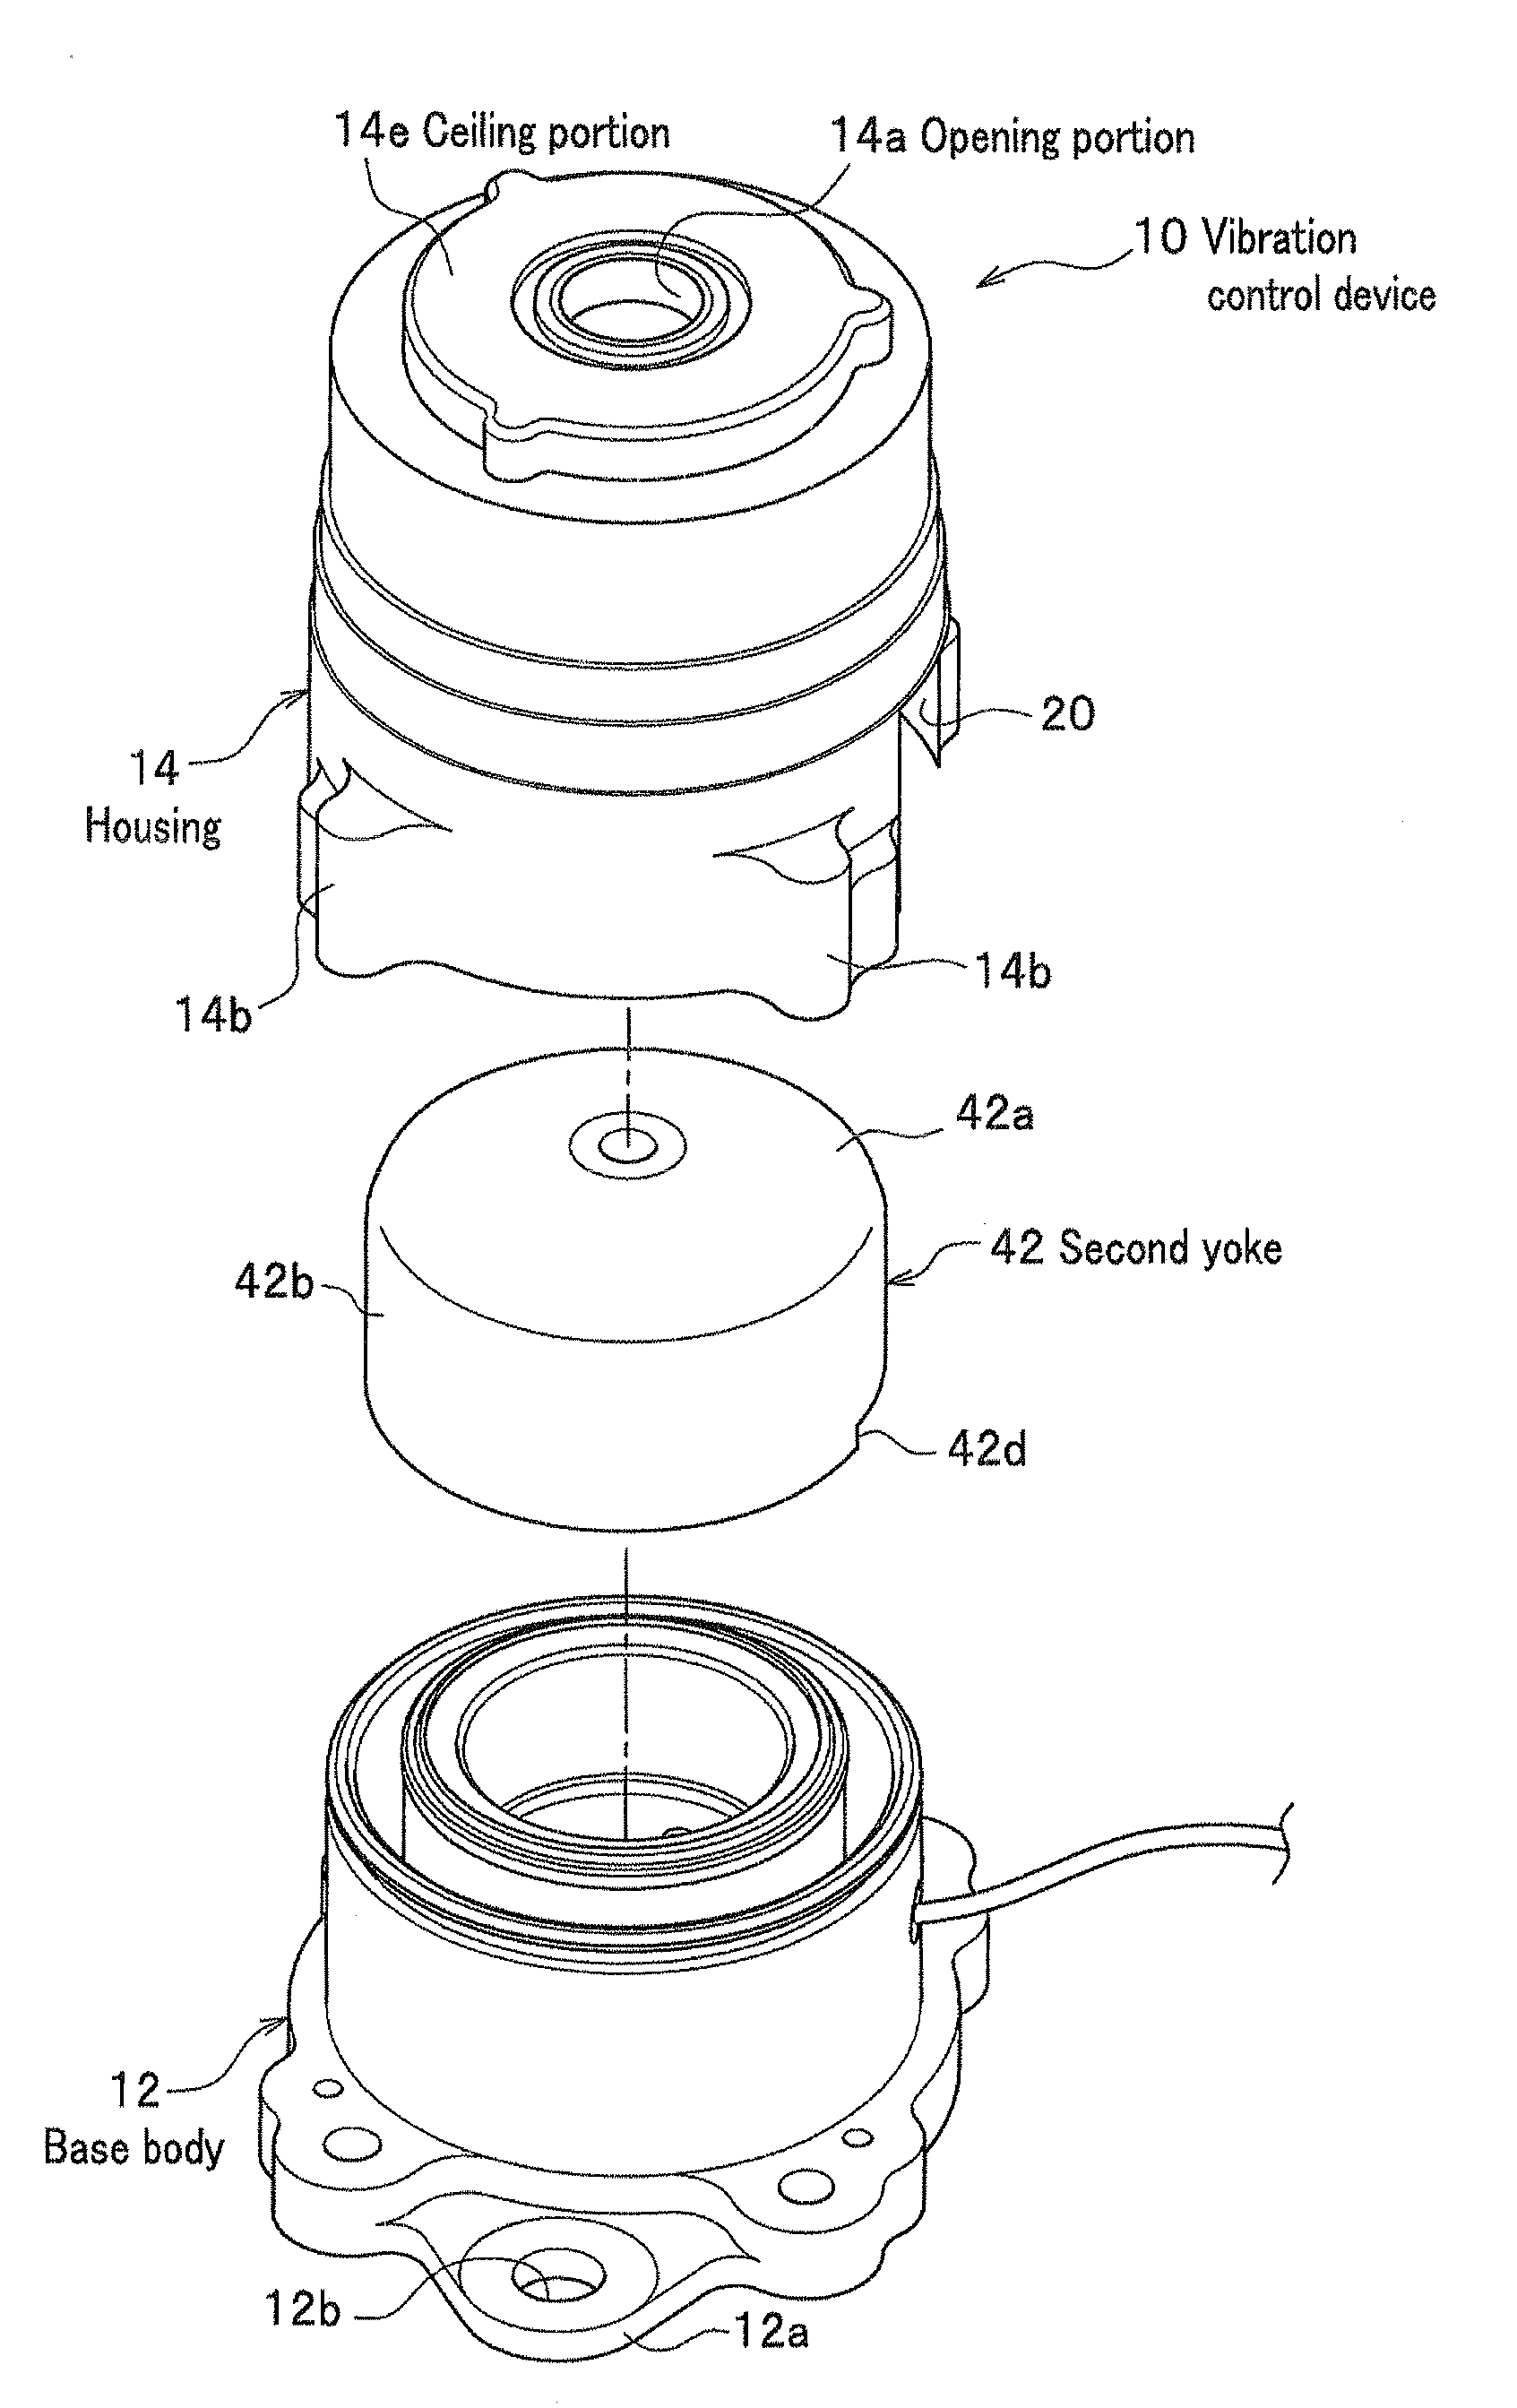 Active antivibration device and manufacturing method for the same